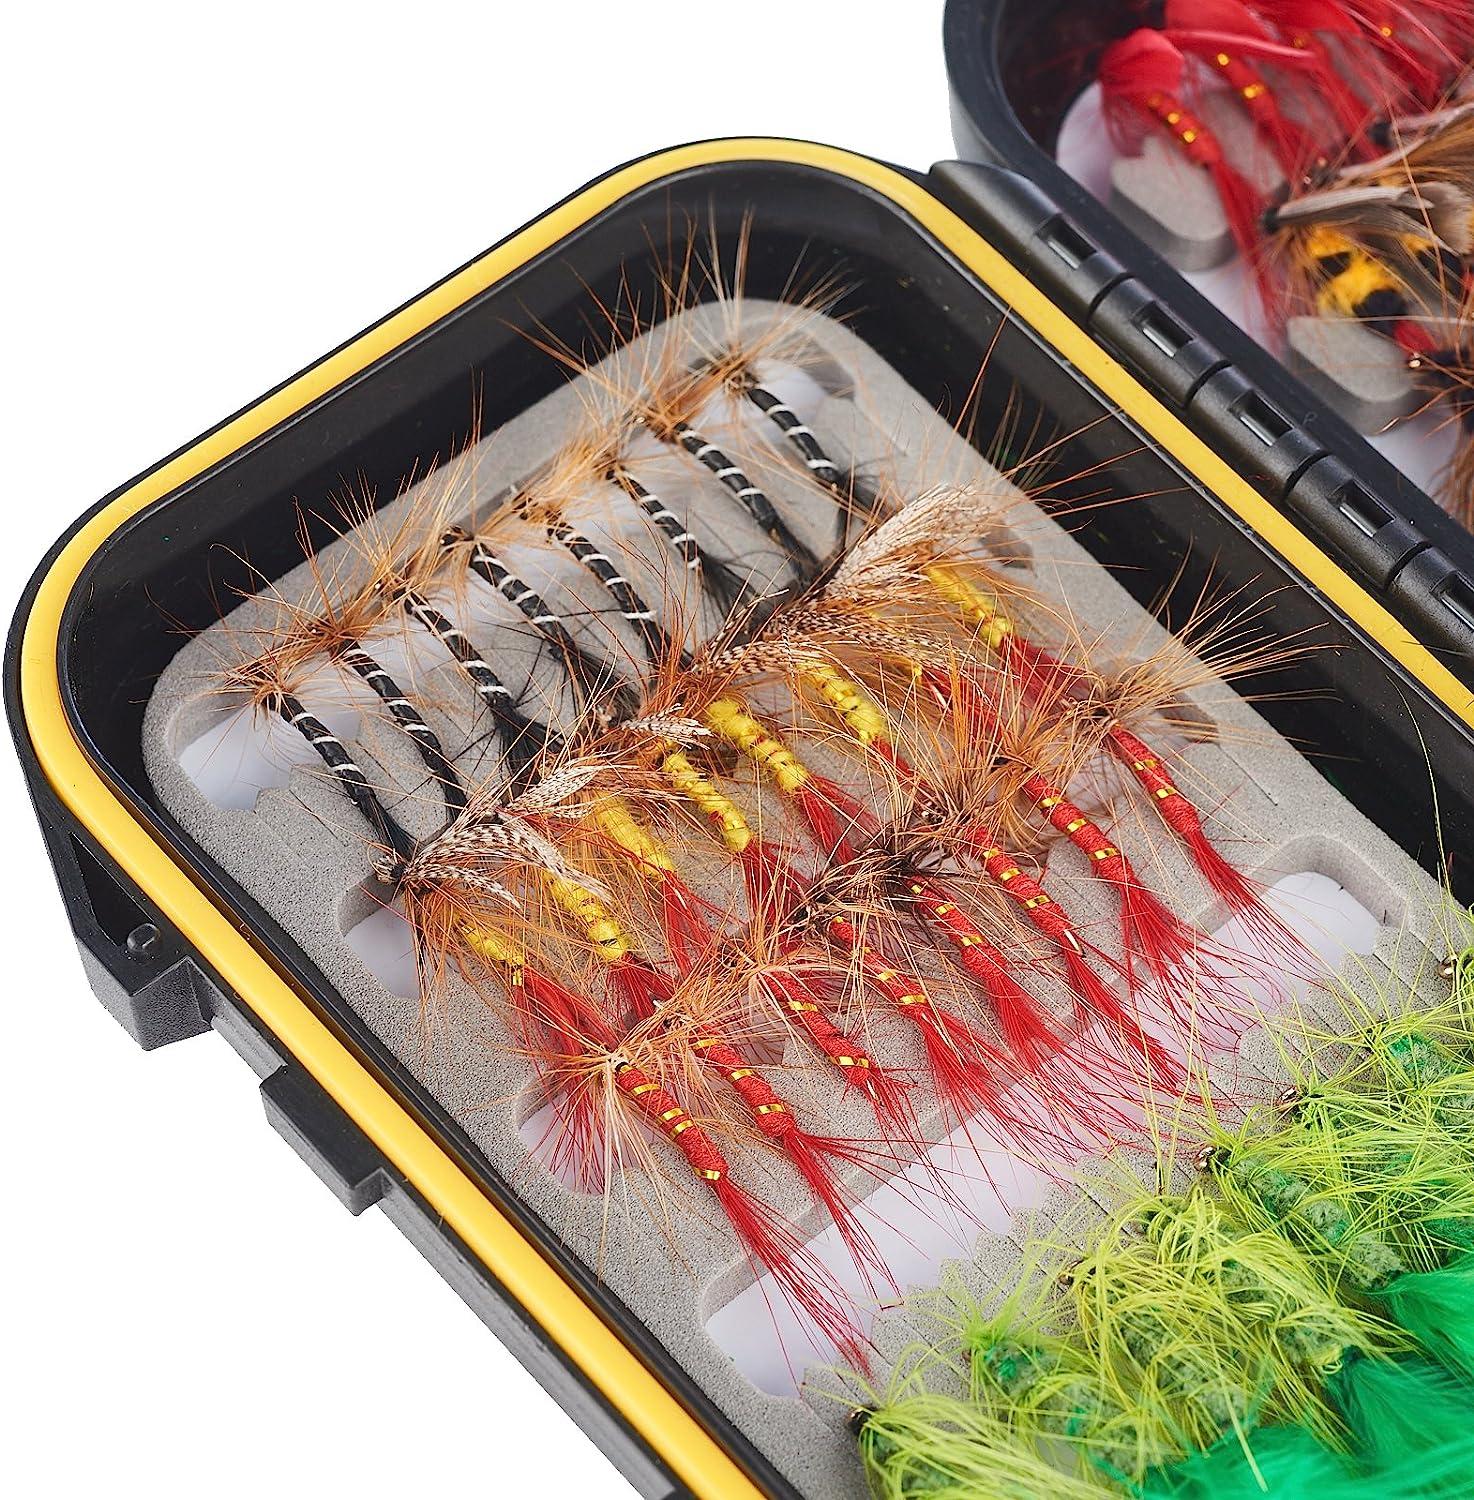 FISHINGSIR Fly Fishing Flies Kit - 64/100/110/120pcs Handmade Fly Fishing  Lures - Dry/Wet Flies,Streamer, Nymph, Emerger with Waterproof Fly Box  MUST-HAVE SERIES - 64PCS Flies Kit + Fly Box